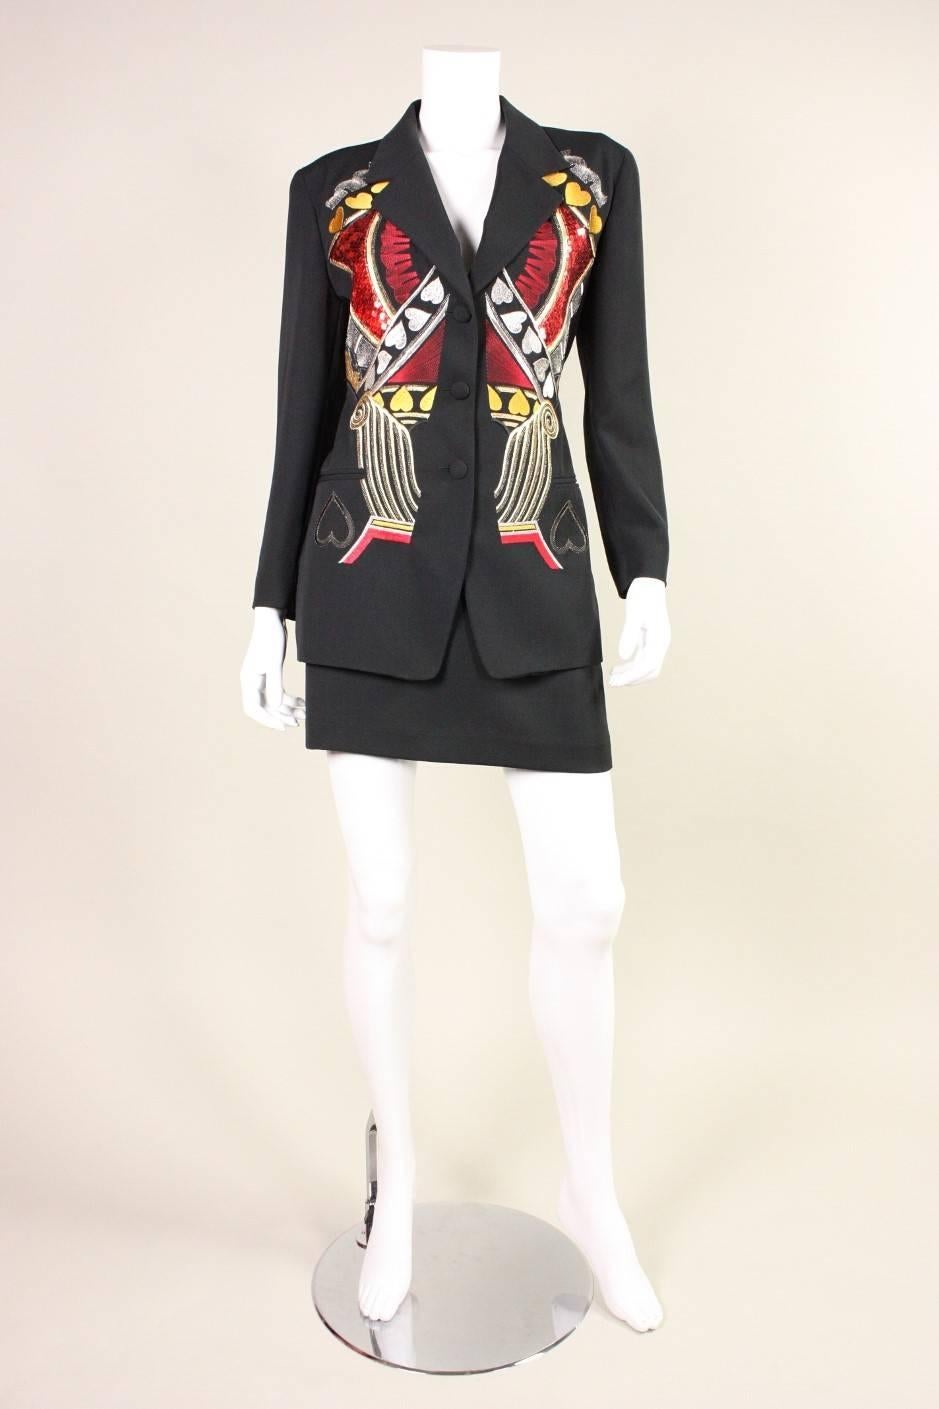 Vintage suit from Iceberg dates to the 1990's and features bold embellishment on the front of the jacket.  Single-breasted jacket has a notch lapel, padded shoulders, and three button closures.  Straight skirt has a side zipper and button at